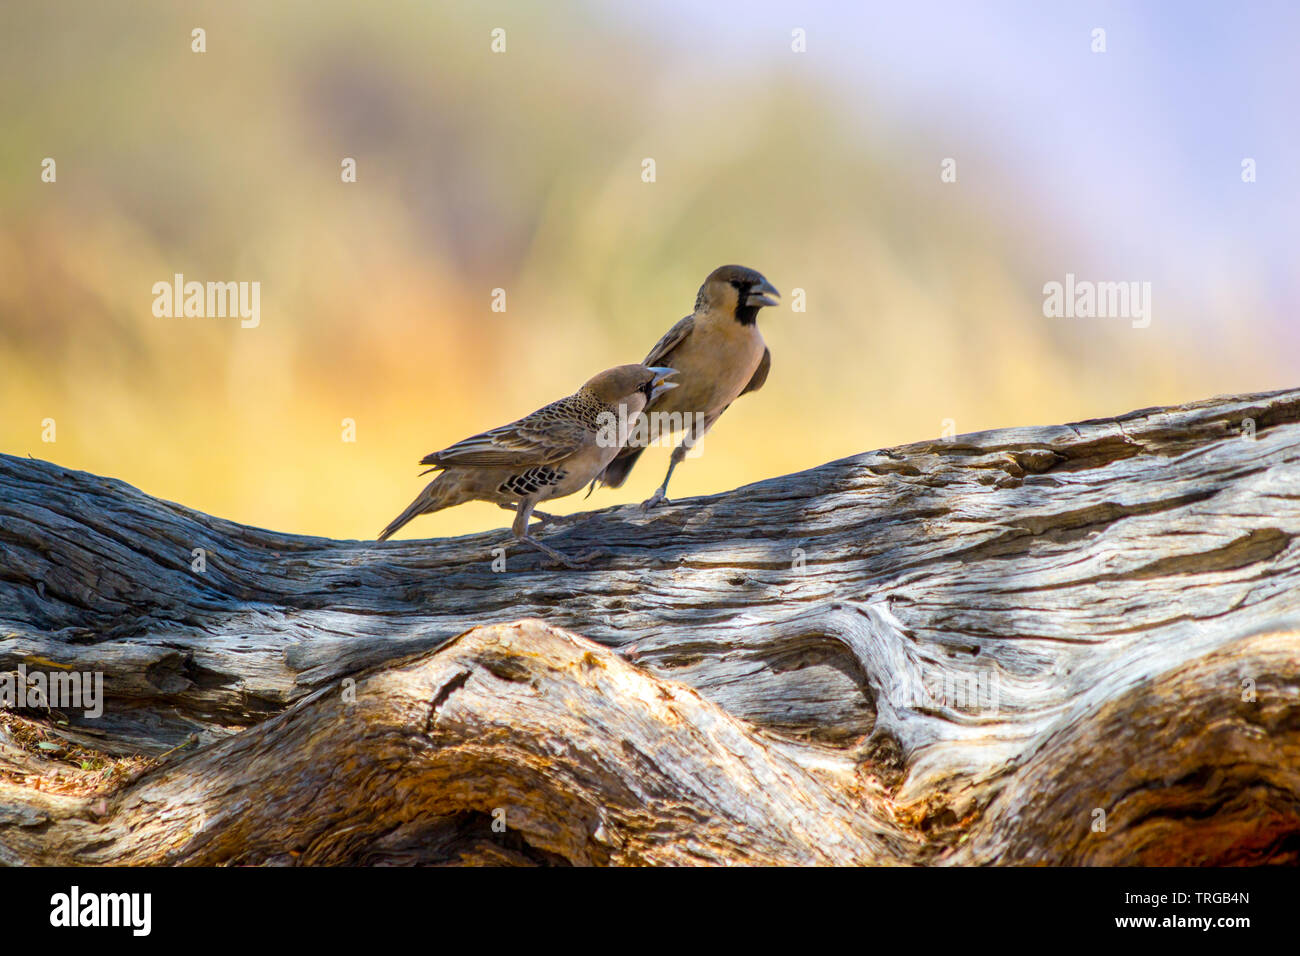 Two sparrows sitting on a branch of wood, looking around Stock Photo